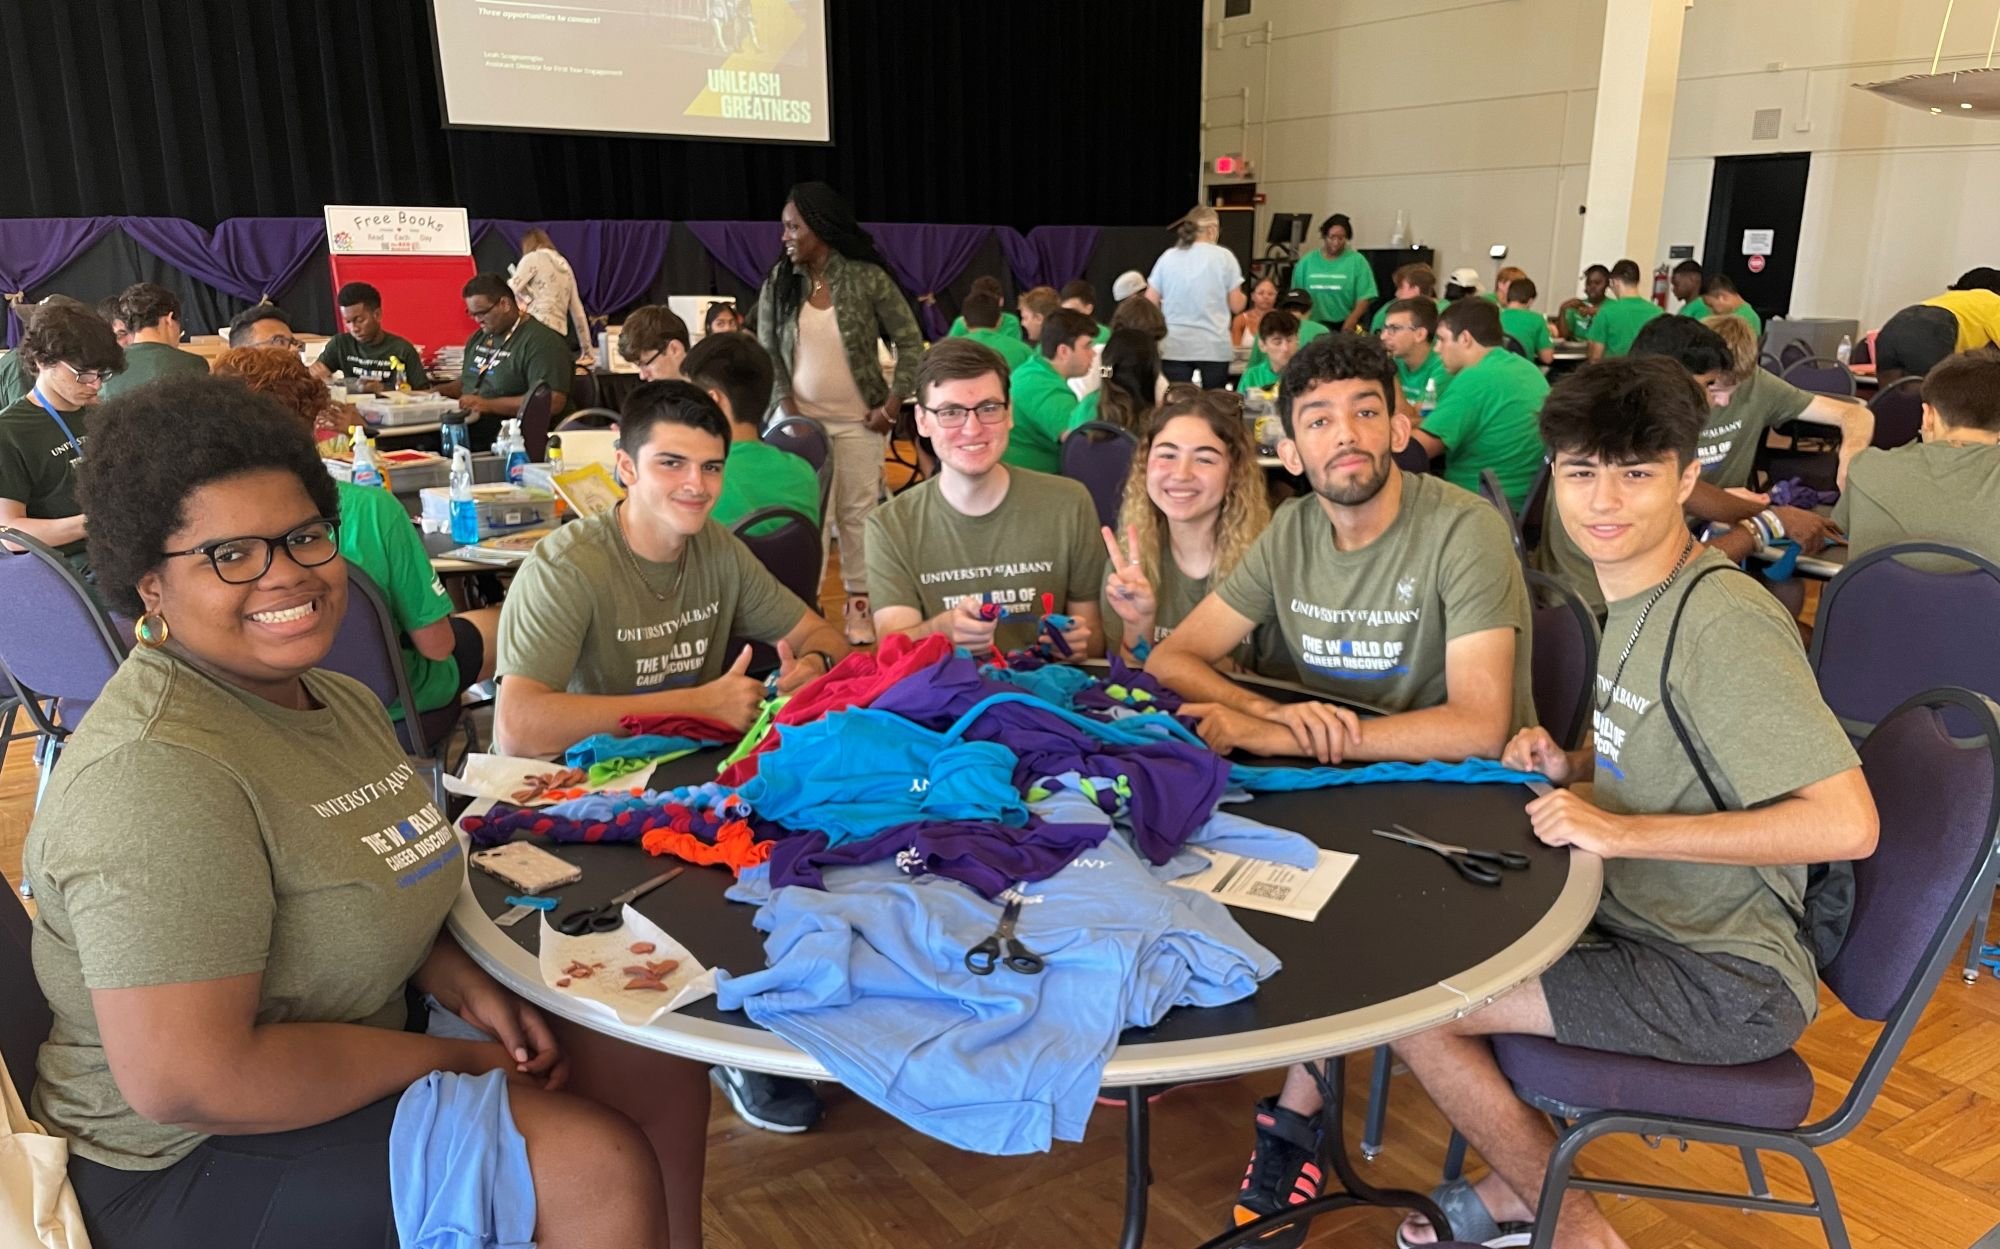 Six students in matching green T-shirts sit around a craft table and smile as they  pose for a photograph.